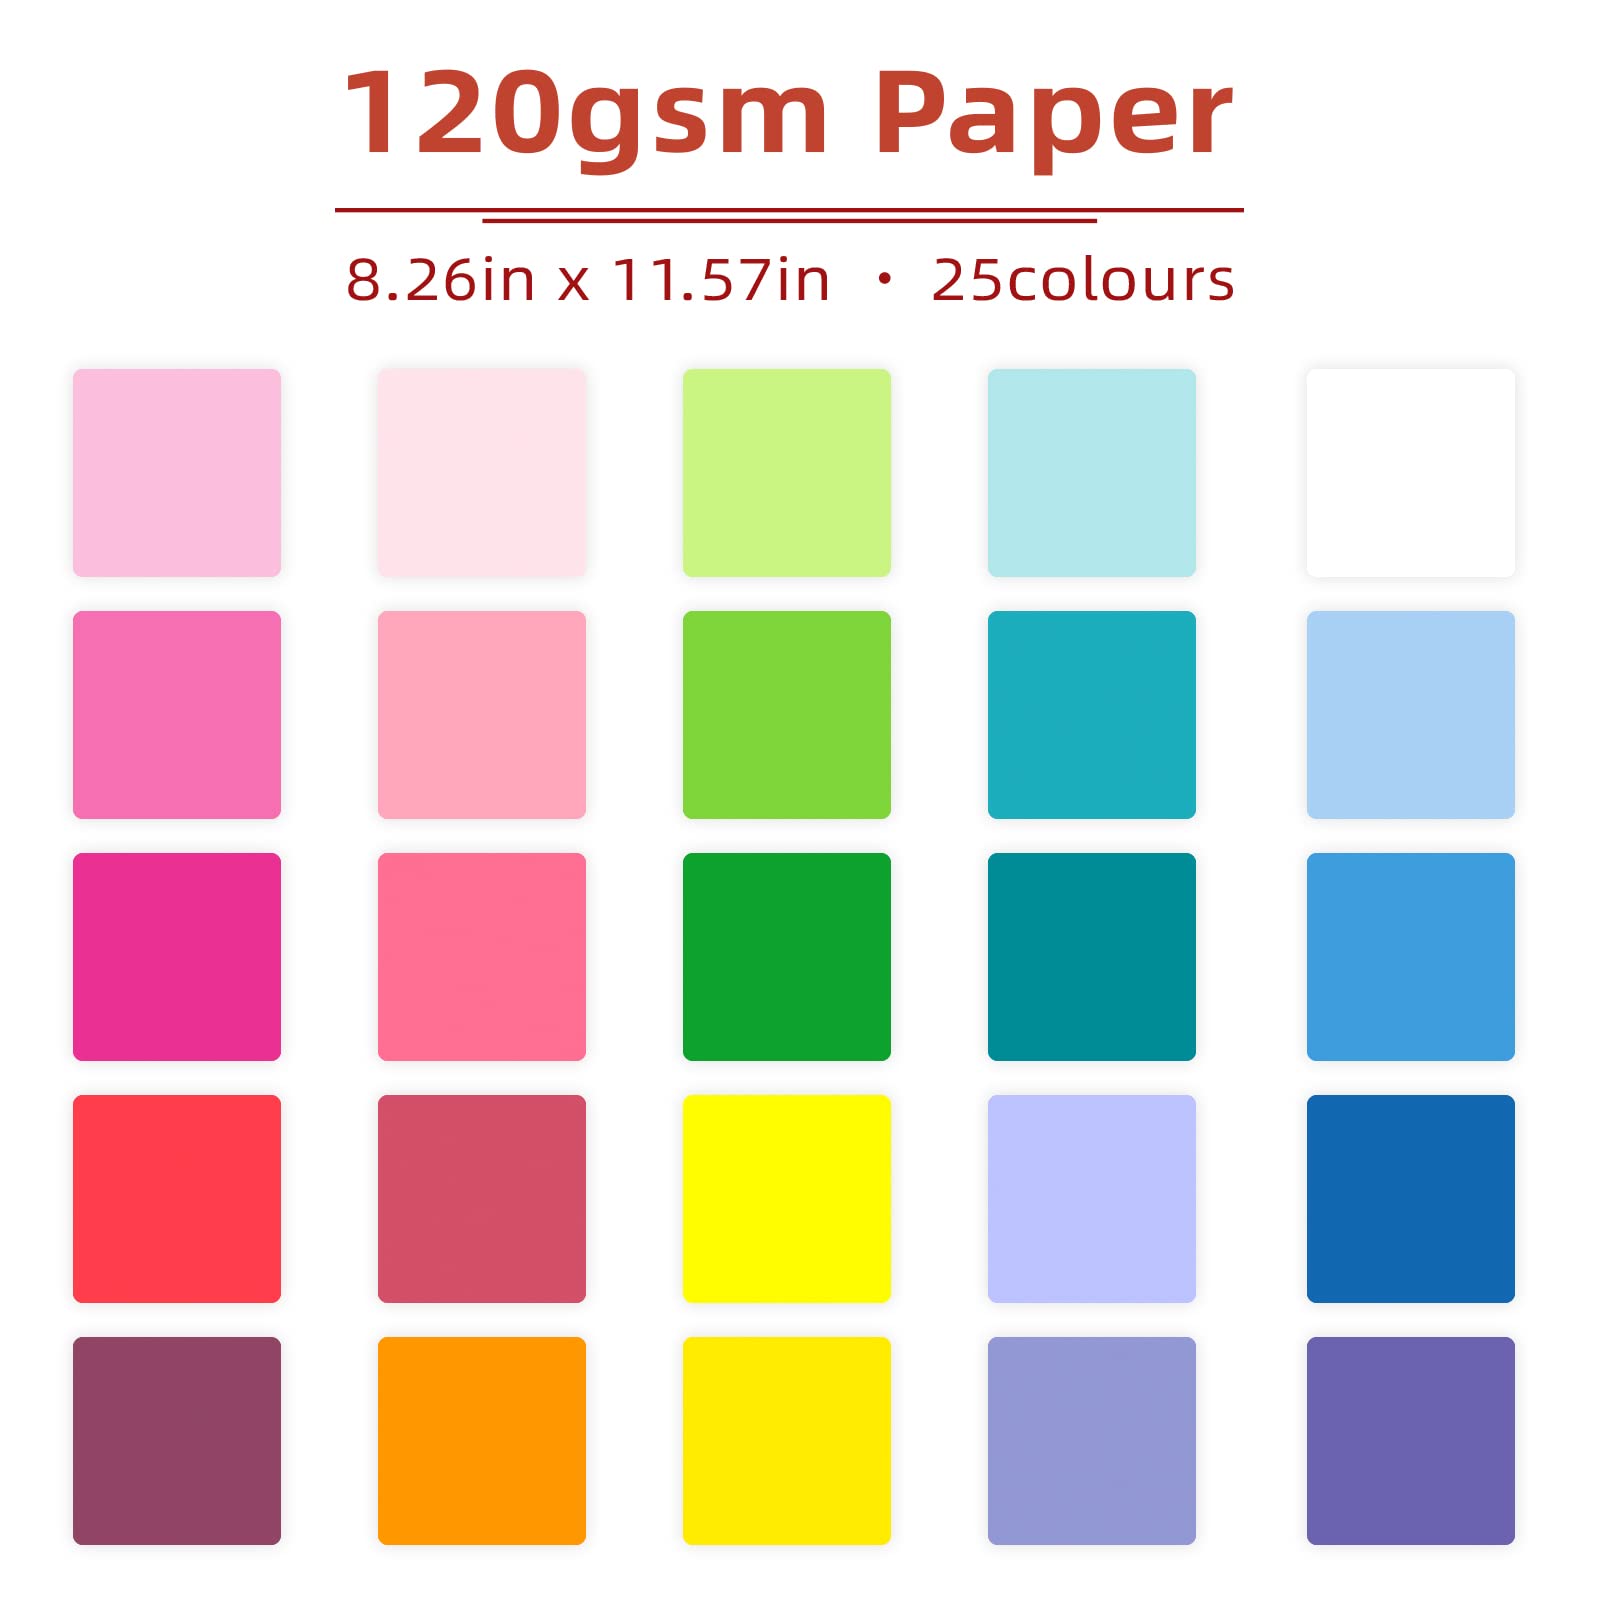 vidabita 100 Sheets Colored Cardstock Paper 120gsm 32lb, 25 Assorted Colors  Pastel Colored Construction Paper, Colored Paper for Kids Card Making